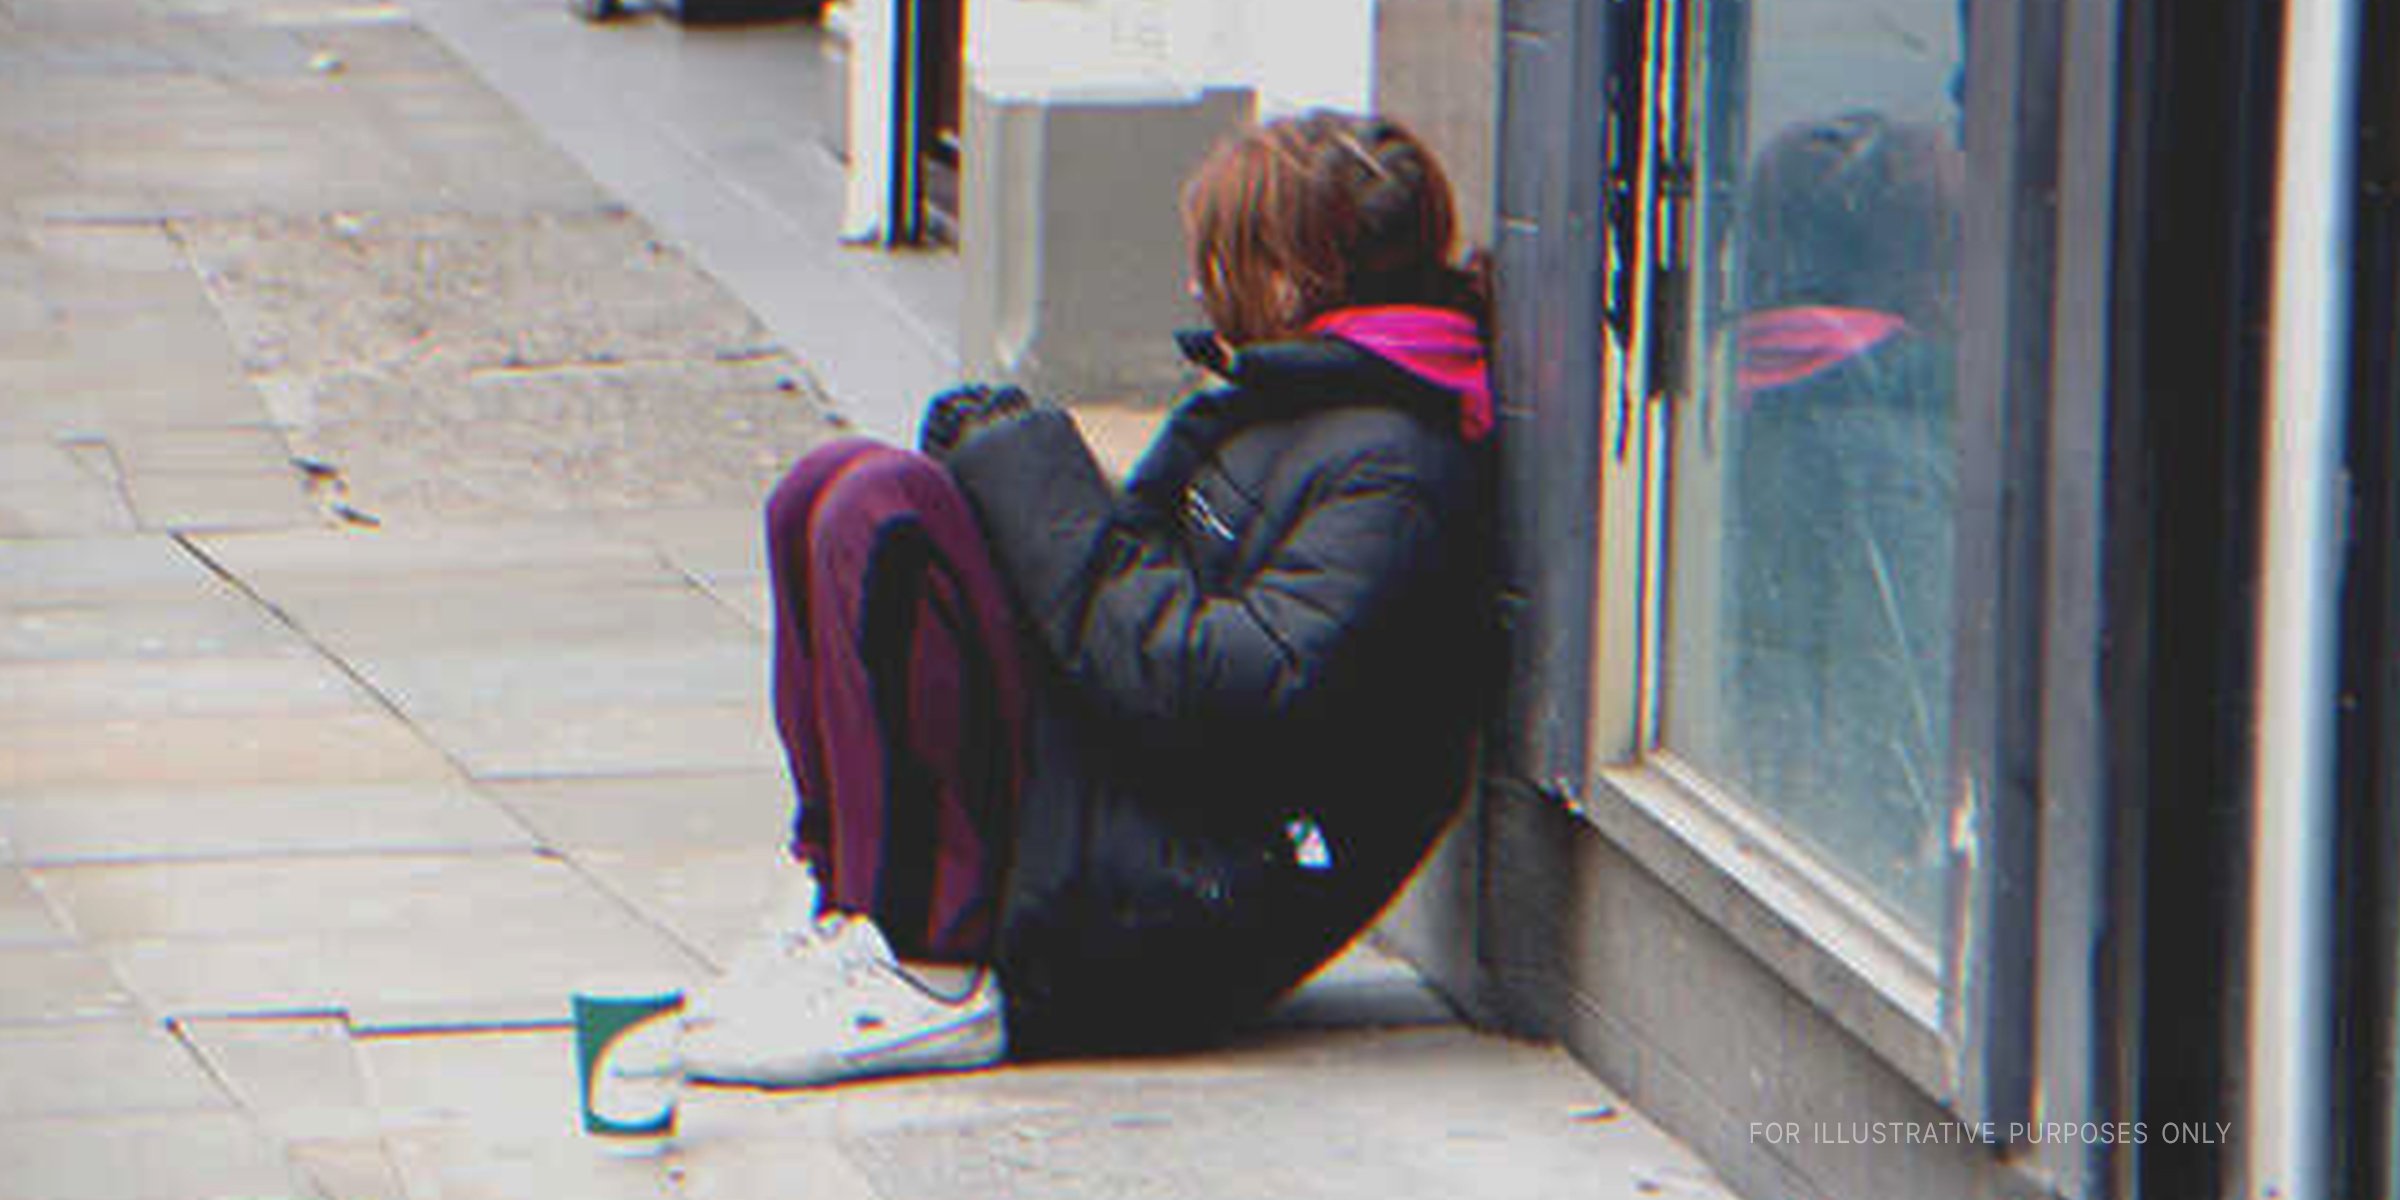 Girl sitting alone on the street | Source: Shutterstock